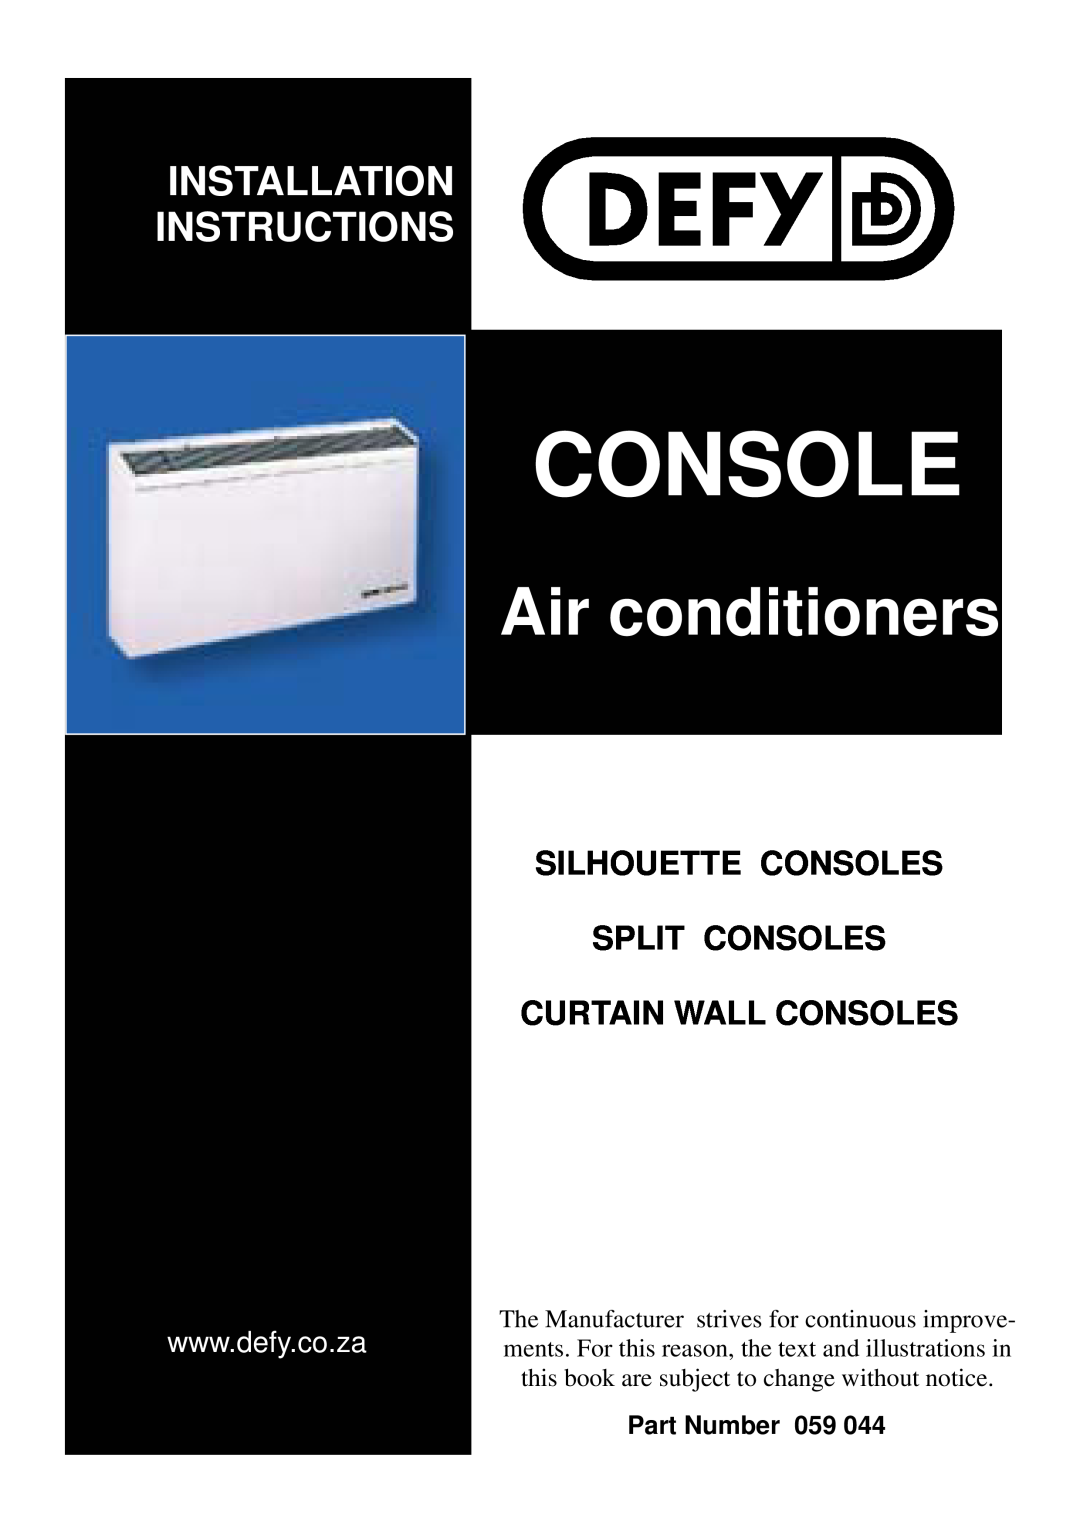 Defy Appliances Part Number 059 044 installation instructions Console, Air conditioners, Installation Instructions 